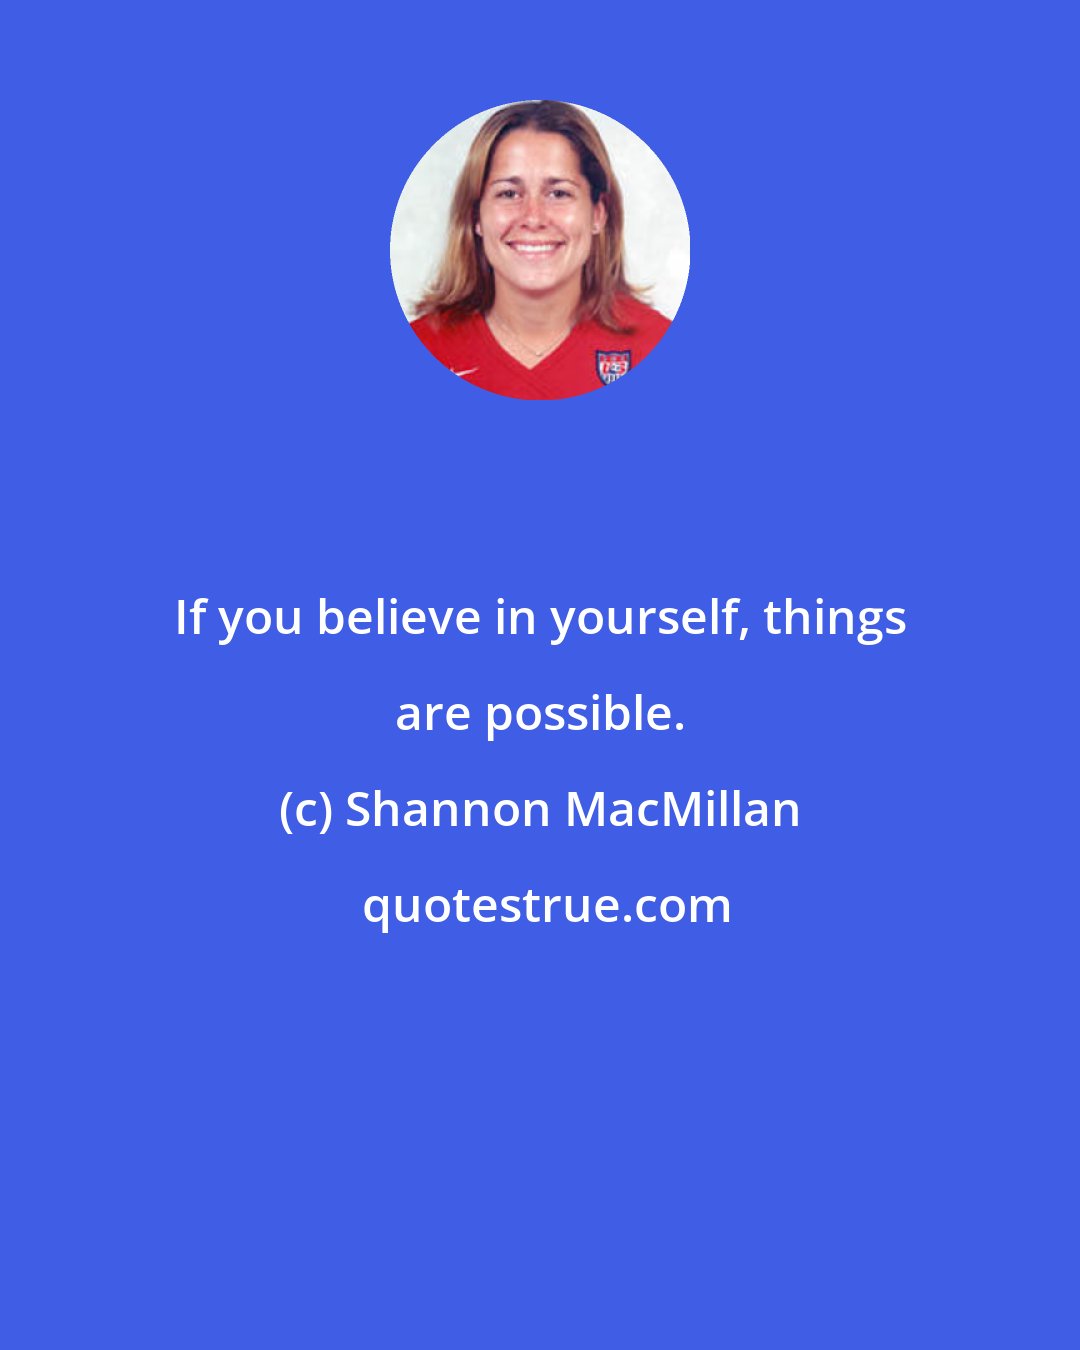 Shannon MacMillan: If you believe in yourself, things are possible.